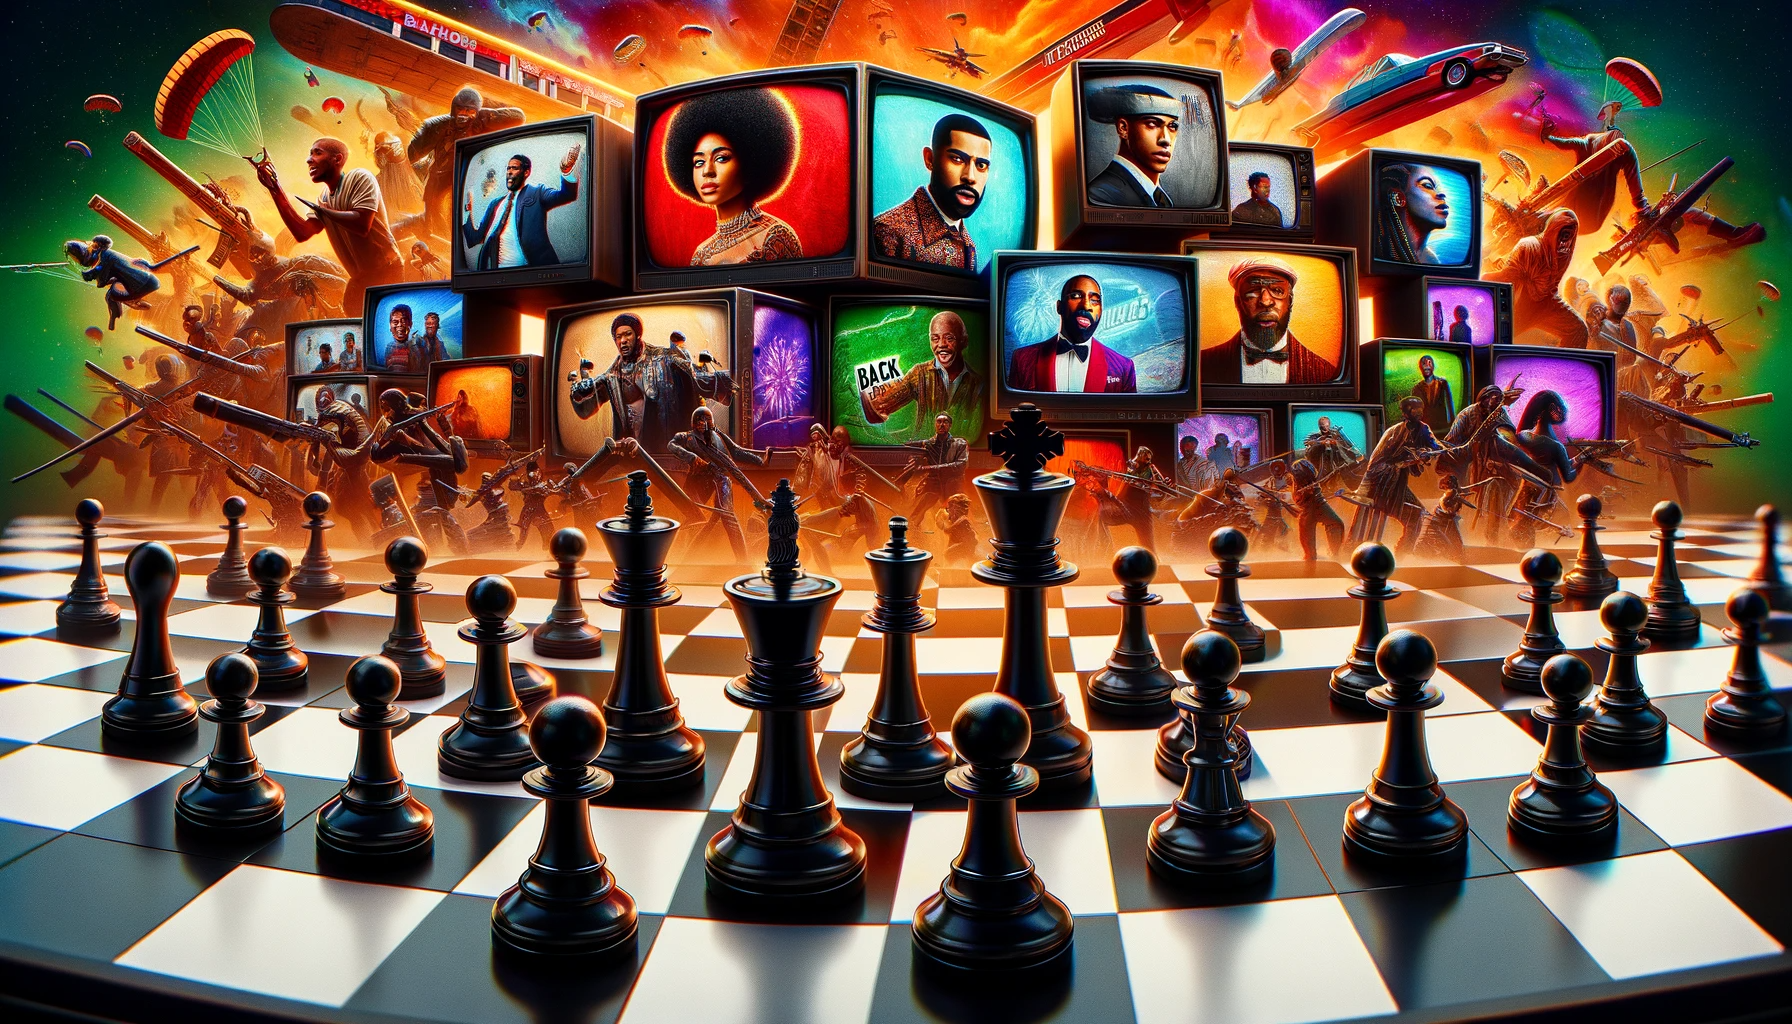 From Pawns to Kings: BET’s Game of Chess in the Battle for Black Audiences